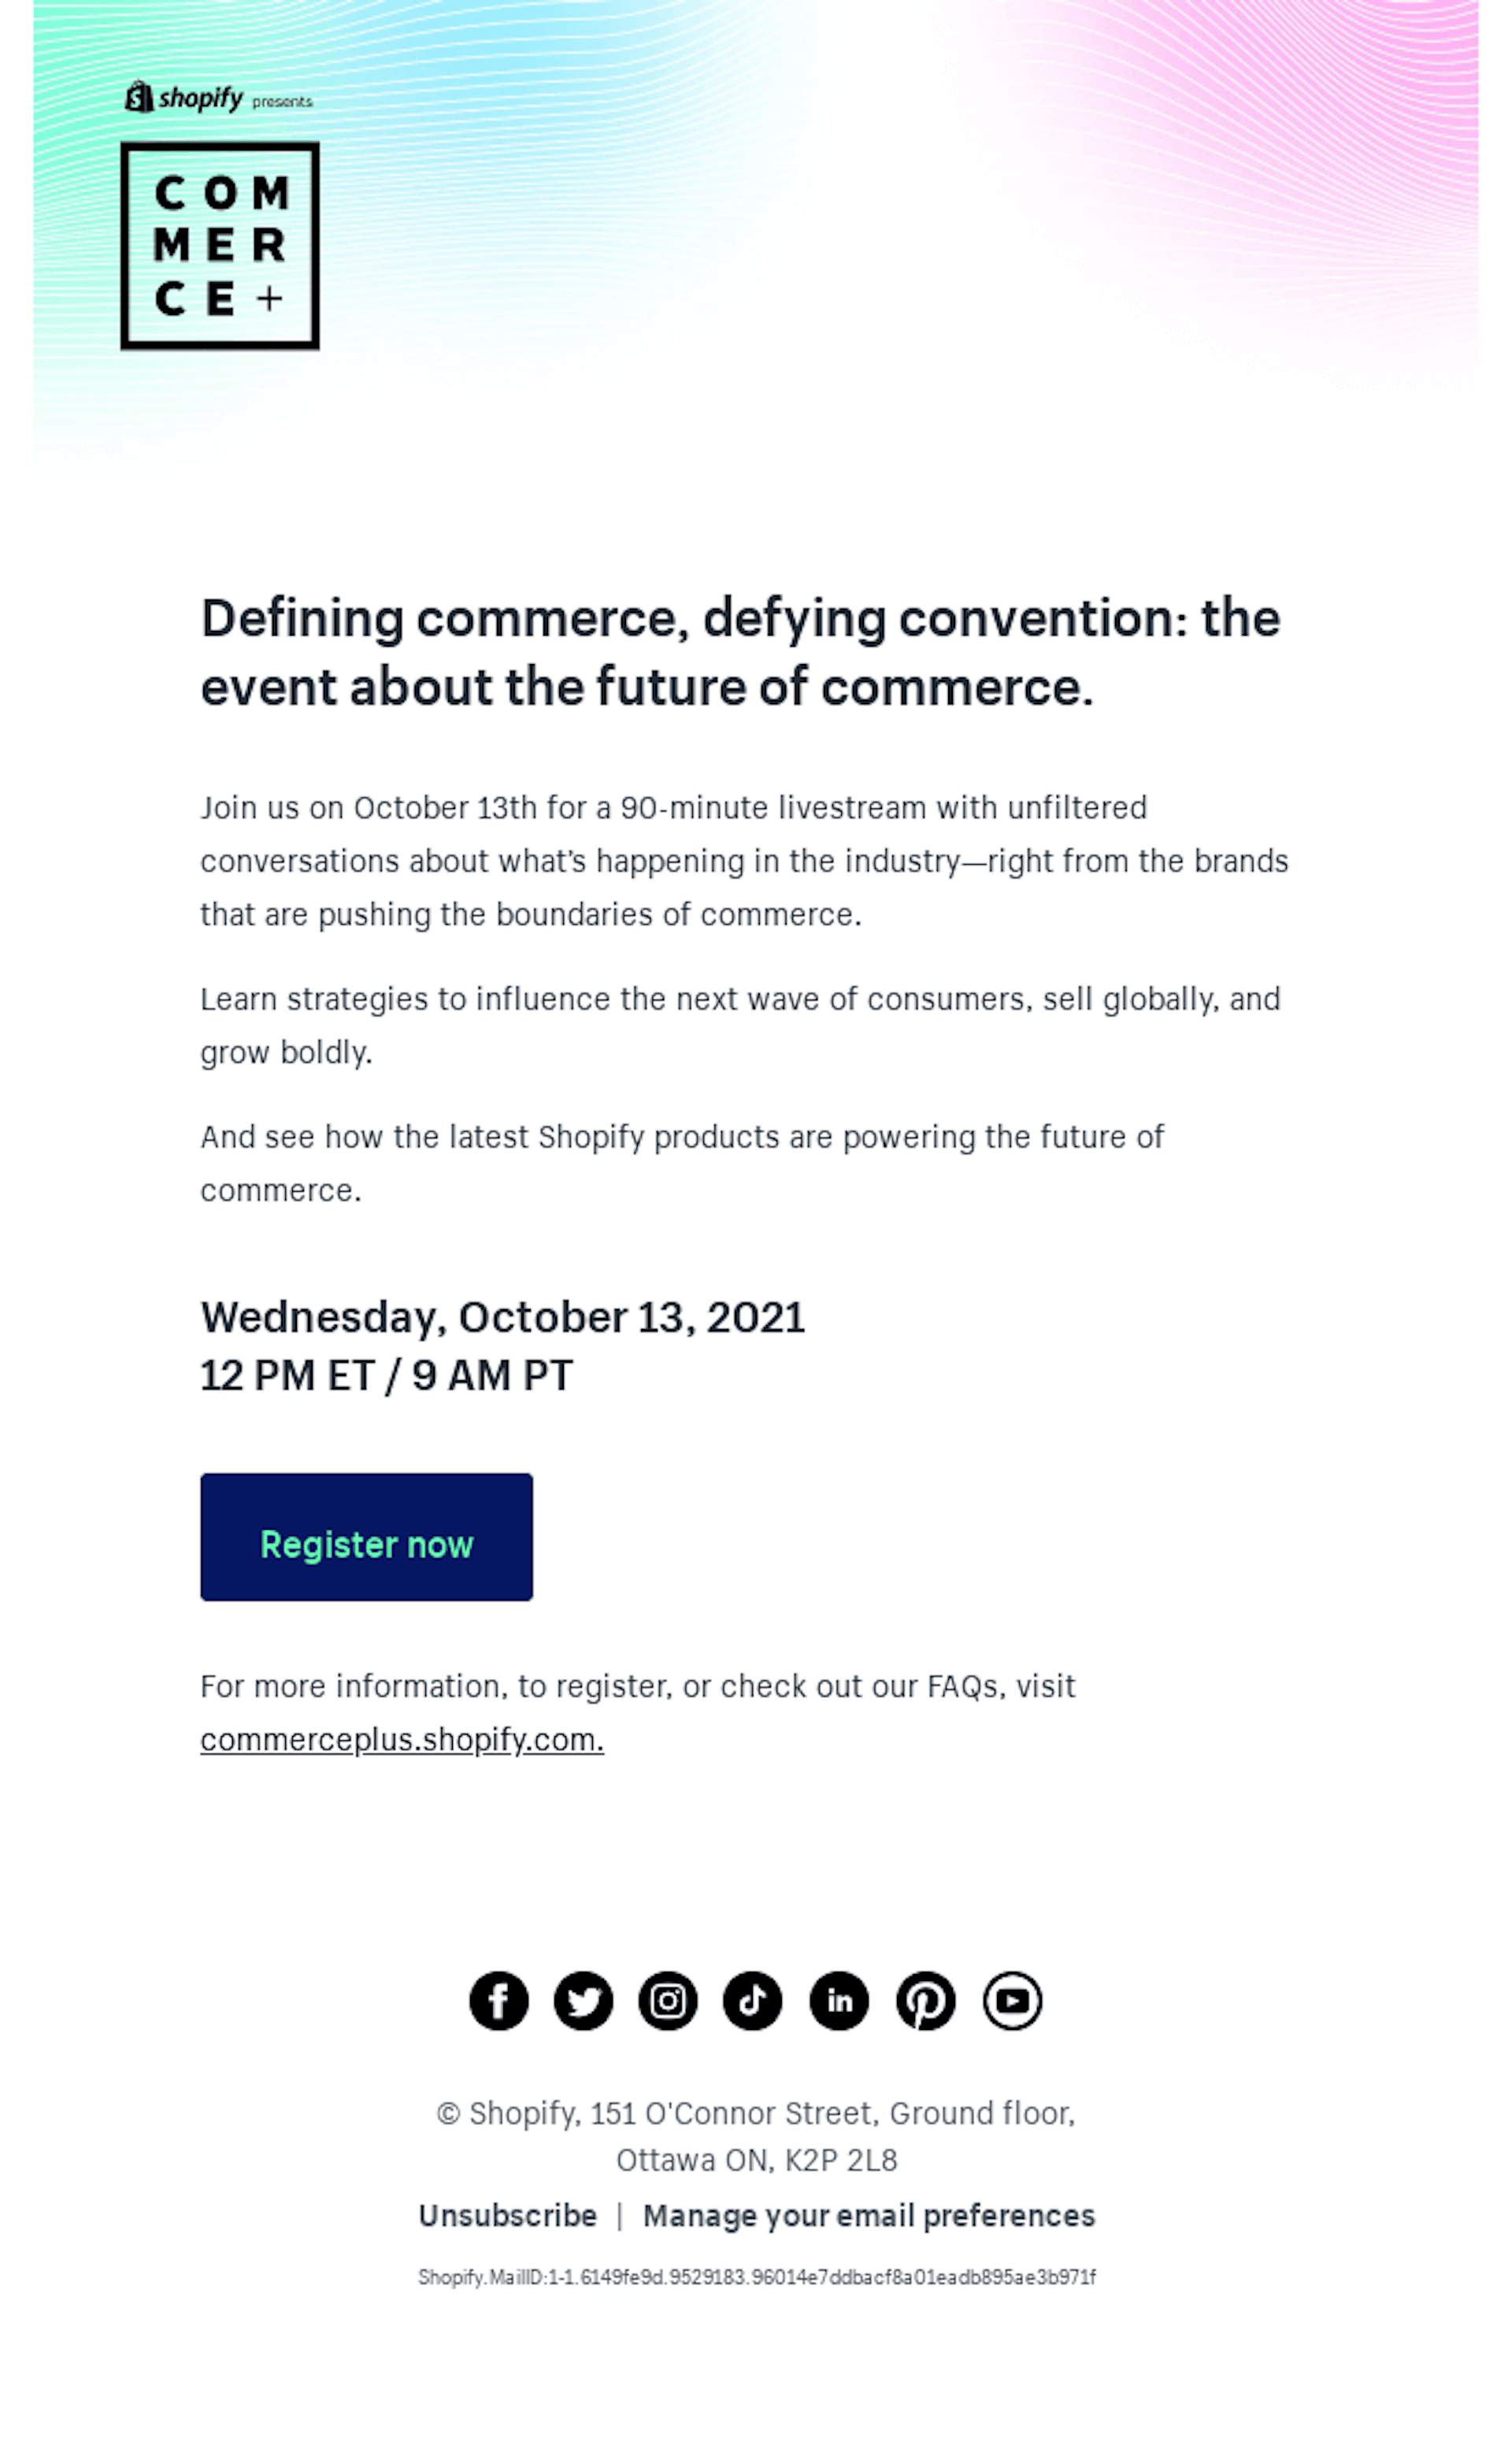 Example invite email from Shopify's Commerce+ event